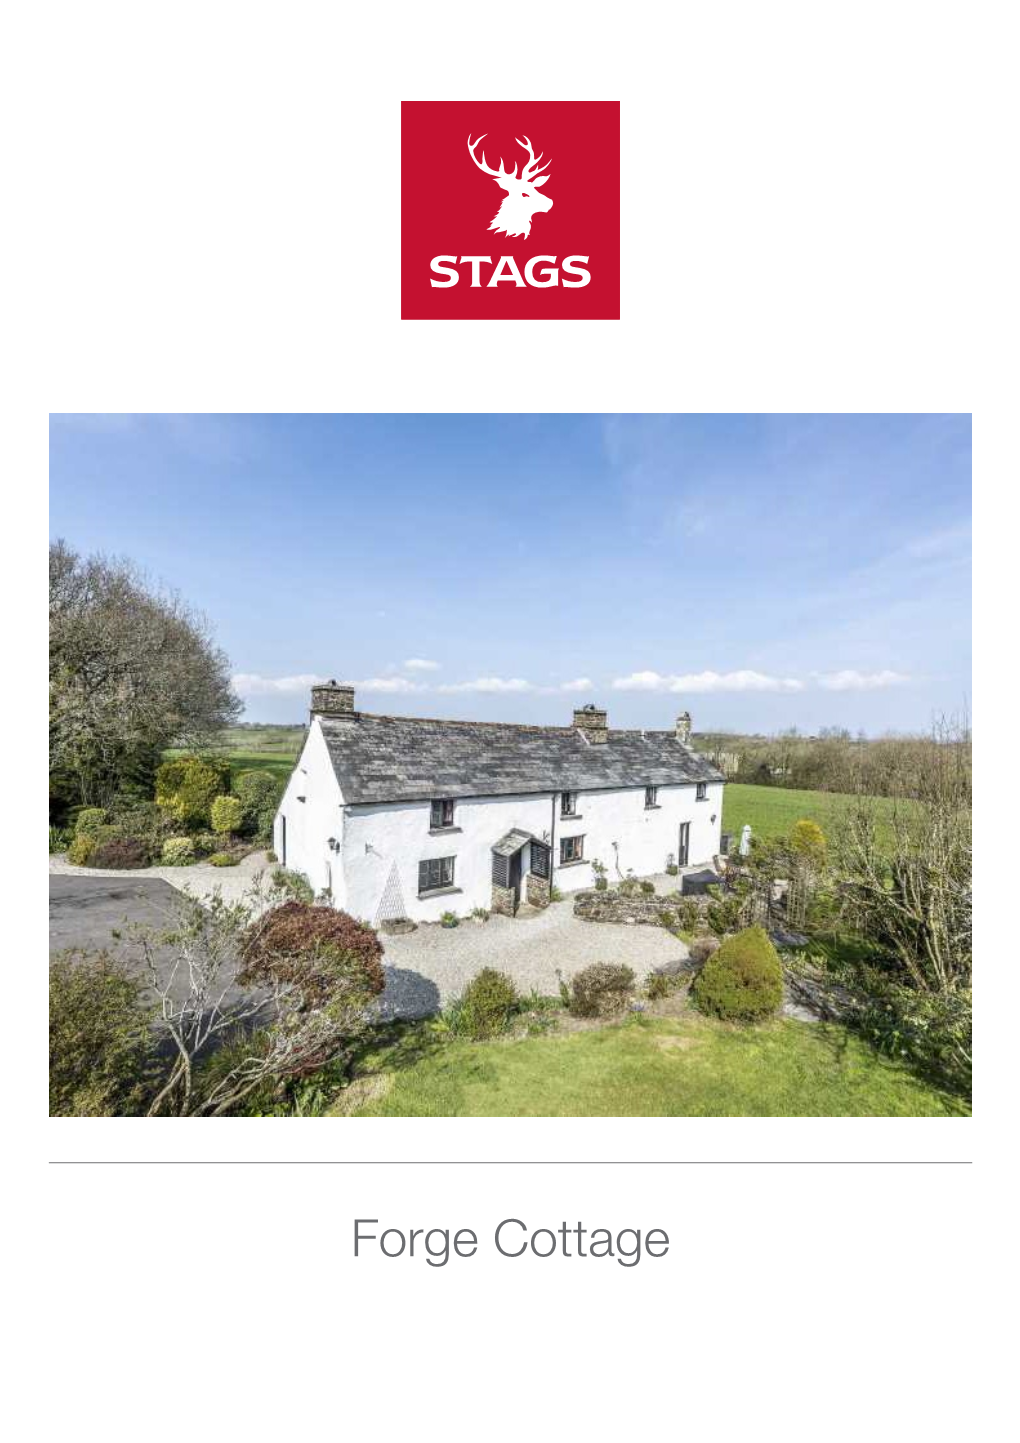 Forge Cottage Forge Cottage Clubworthy, North Petherwin, Launceston, Cornwall, PL15 8NZ